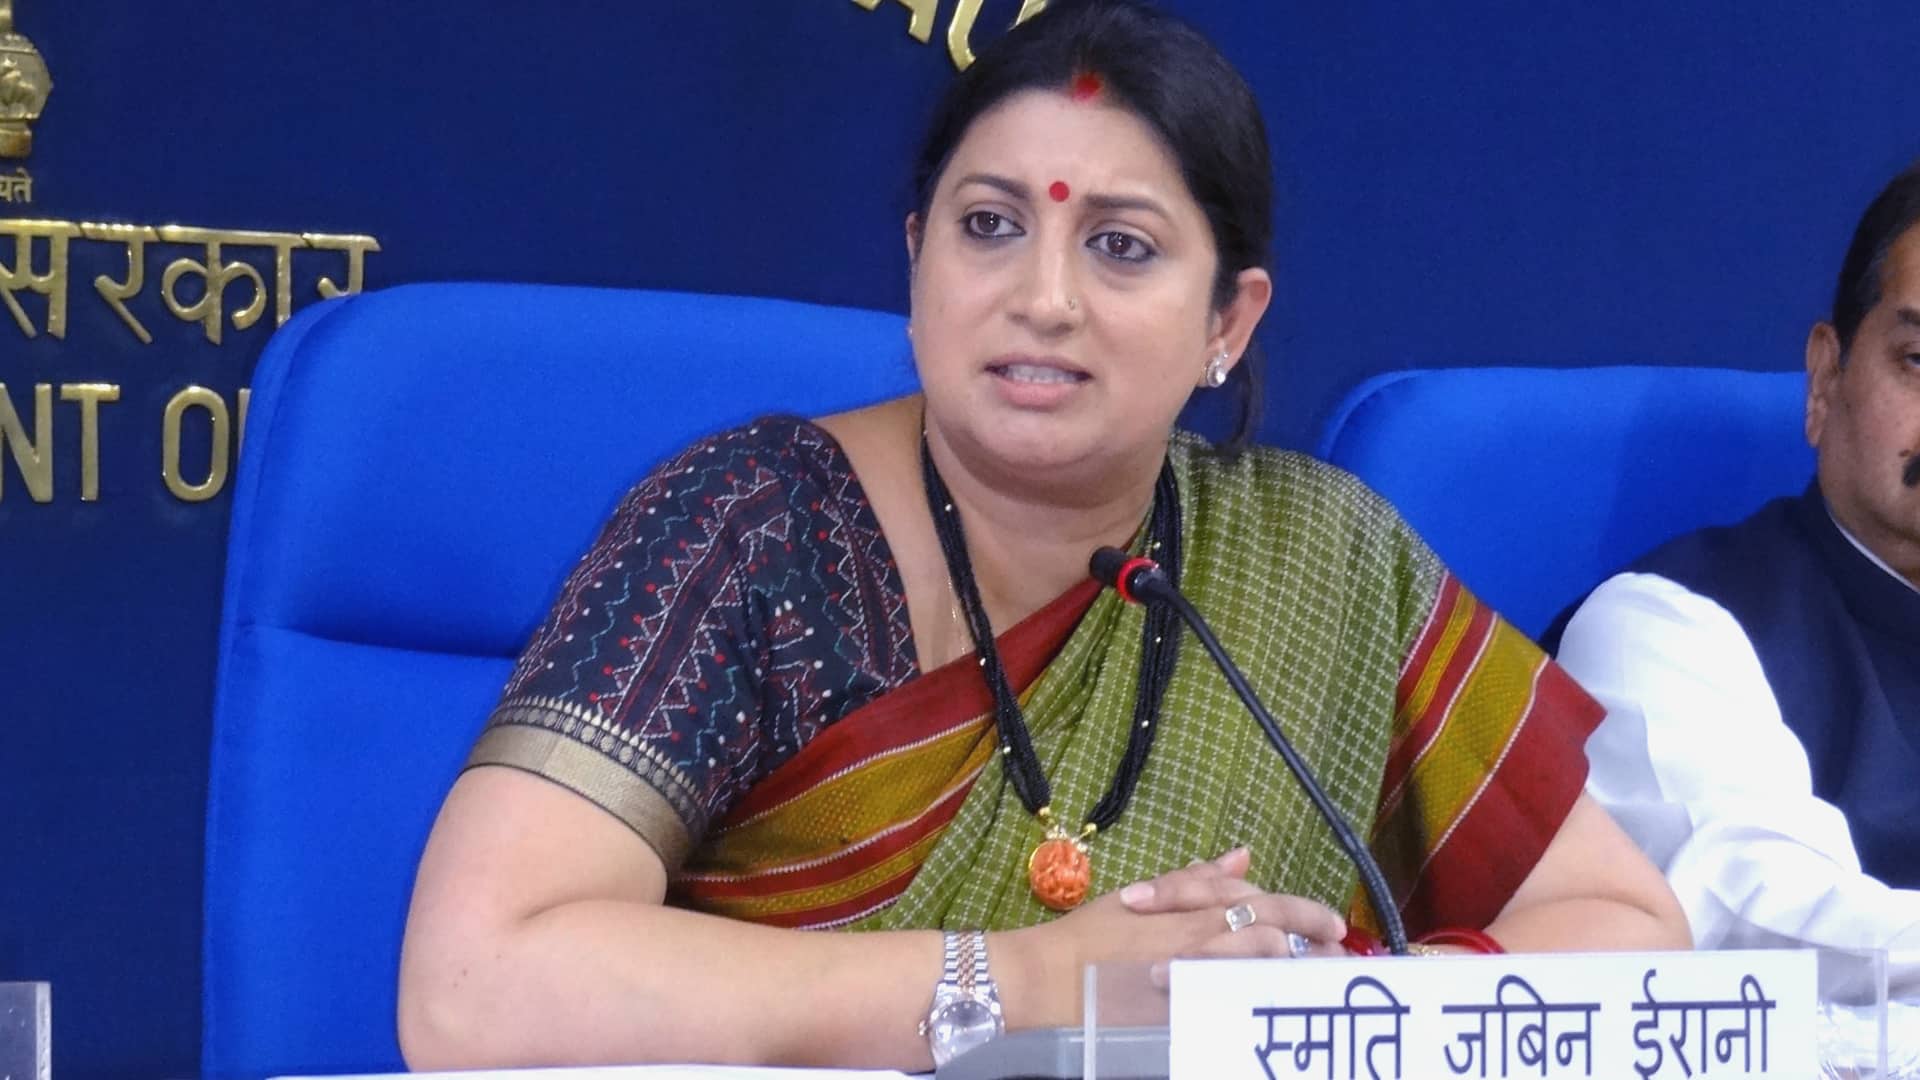 Govt committed to welfare of farmers: Irani